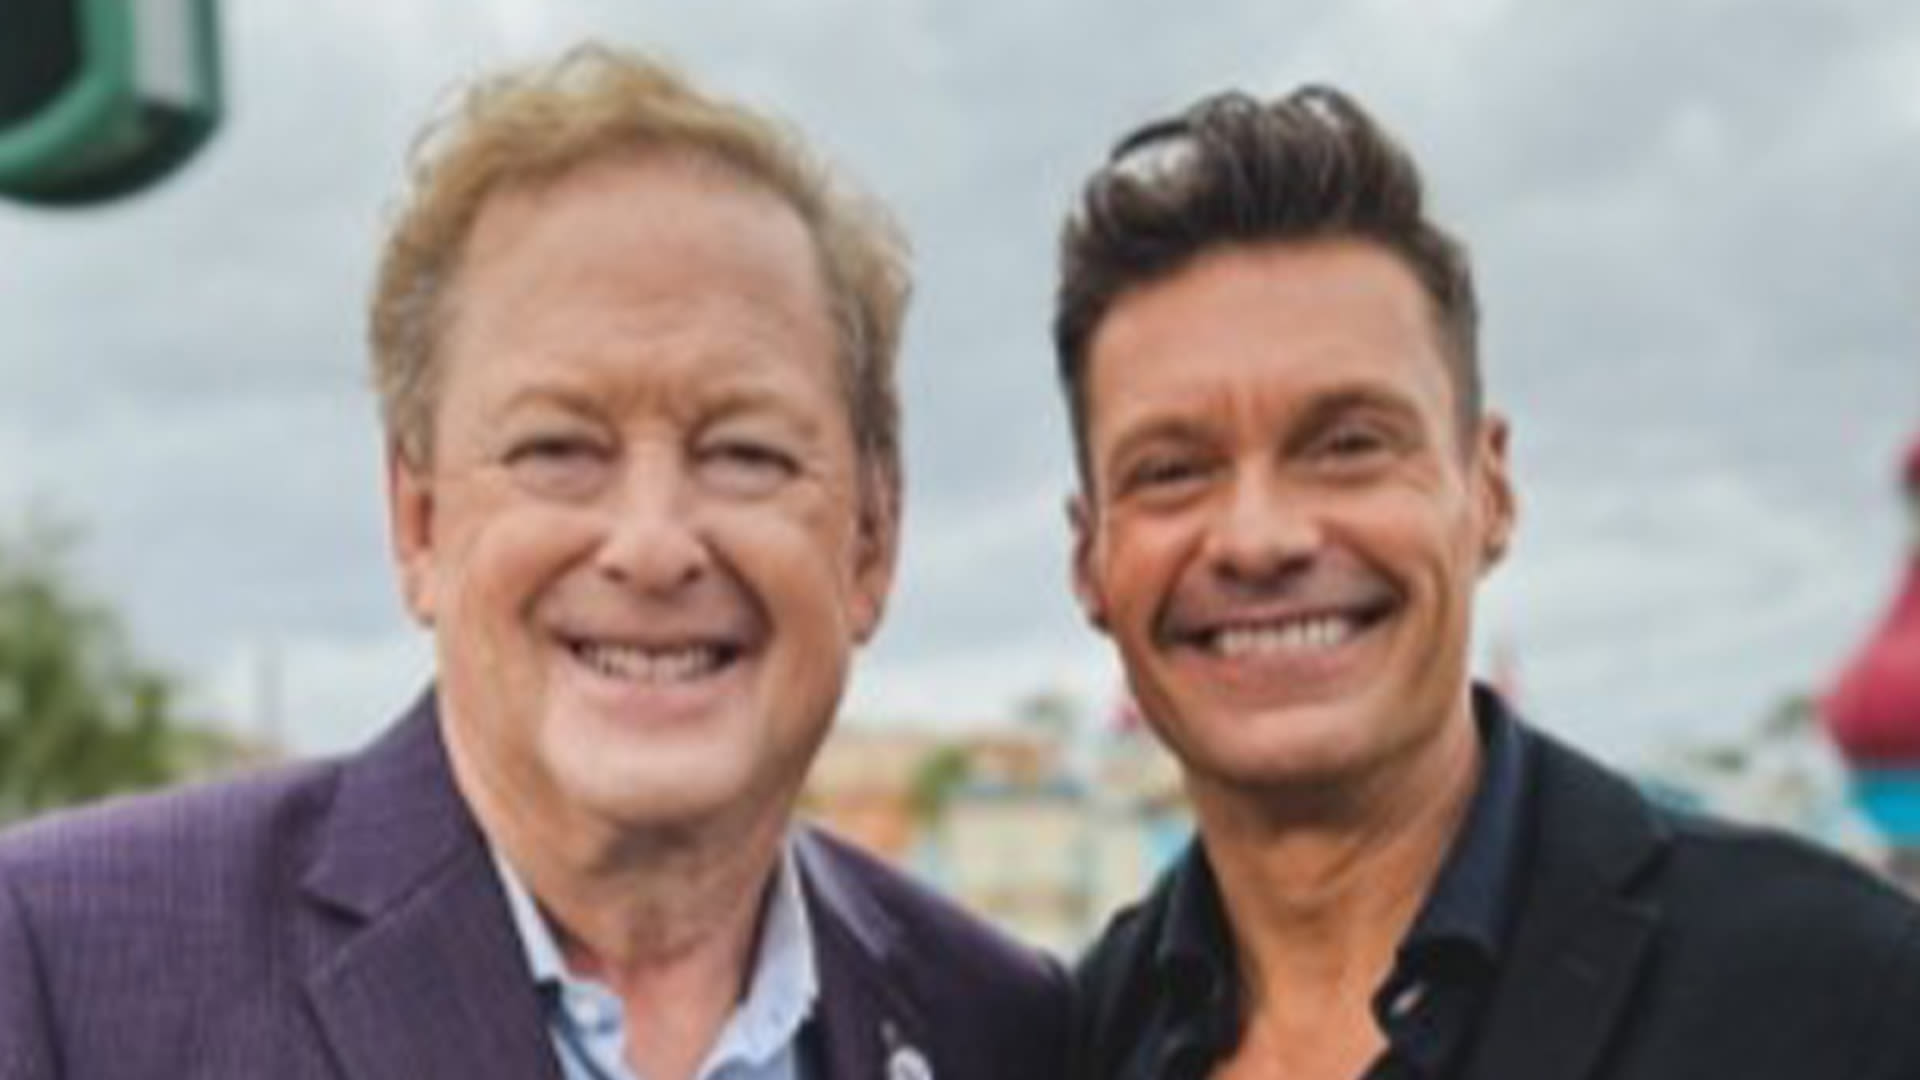 Ryan Seacrest pays touching tribute to Sam Rubin after anchor's death